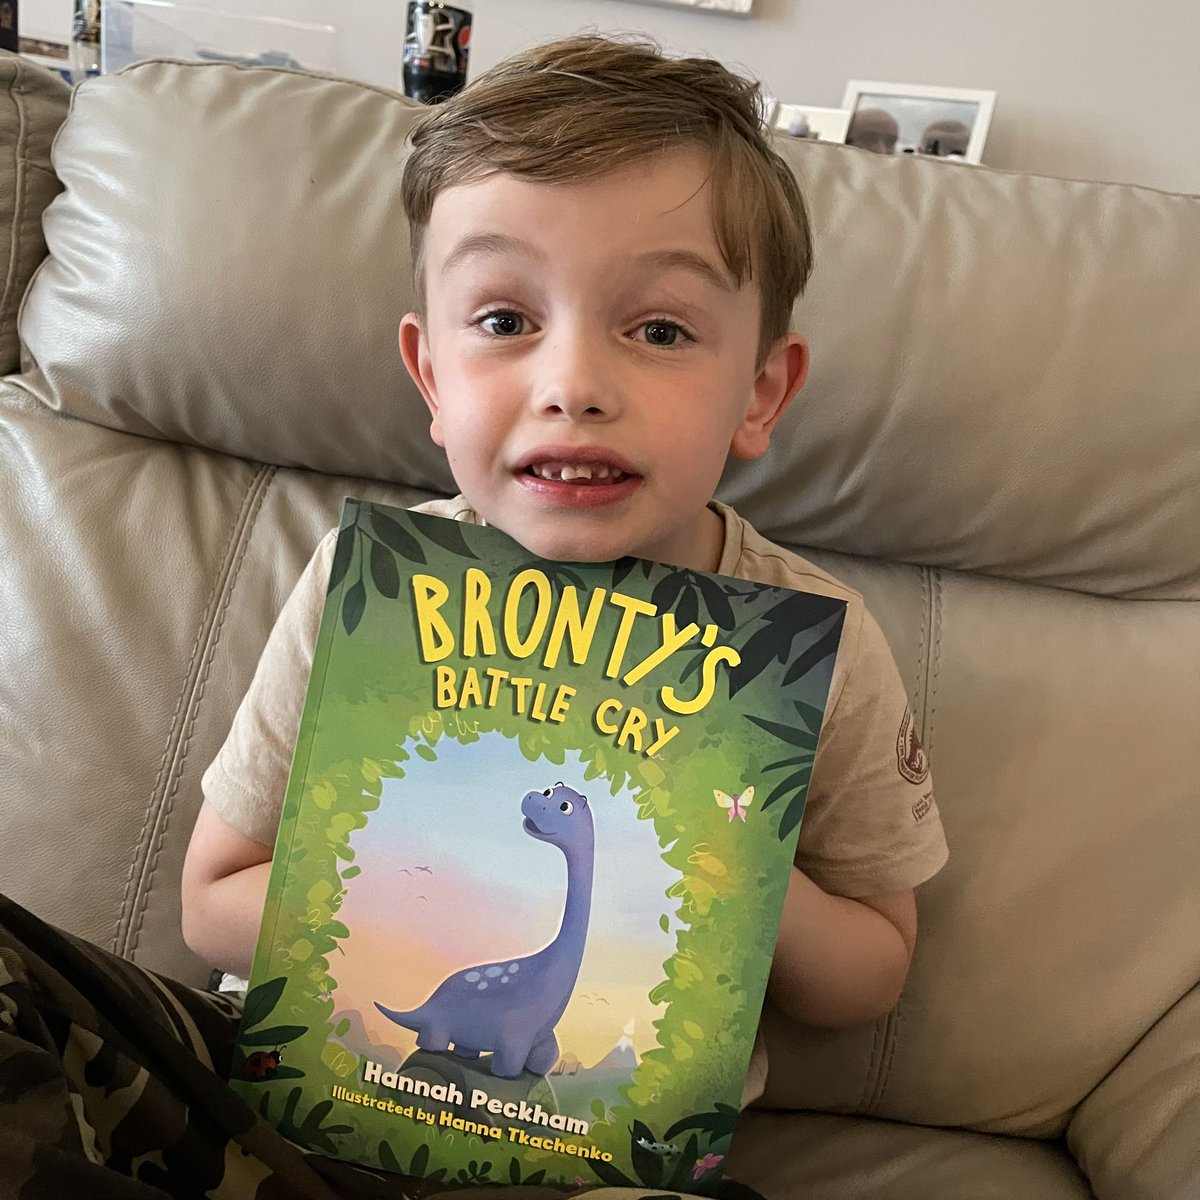 Harris has been enjoying Bronty’s Battle Cry by @h_peckham today.

I caught up with Hannah recently for the #FLBpodcast to hear all about Bronty and the #PantsToLeukaemia campaign for her son Bodhi. 

Catch it on Thu, 6pm and check out Bronty’s Battle Cry - Harris recommends!